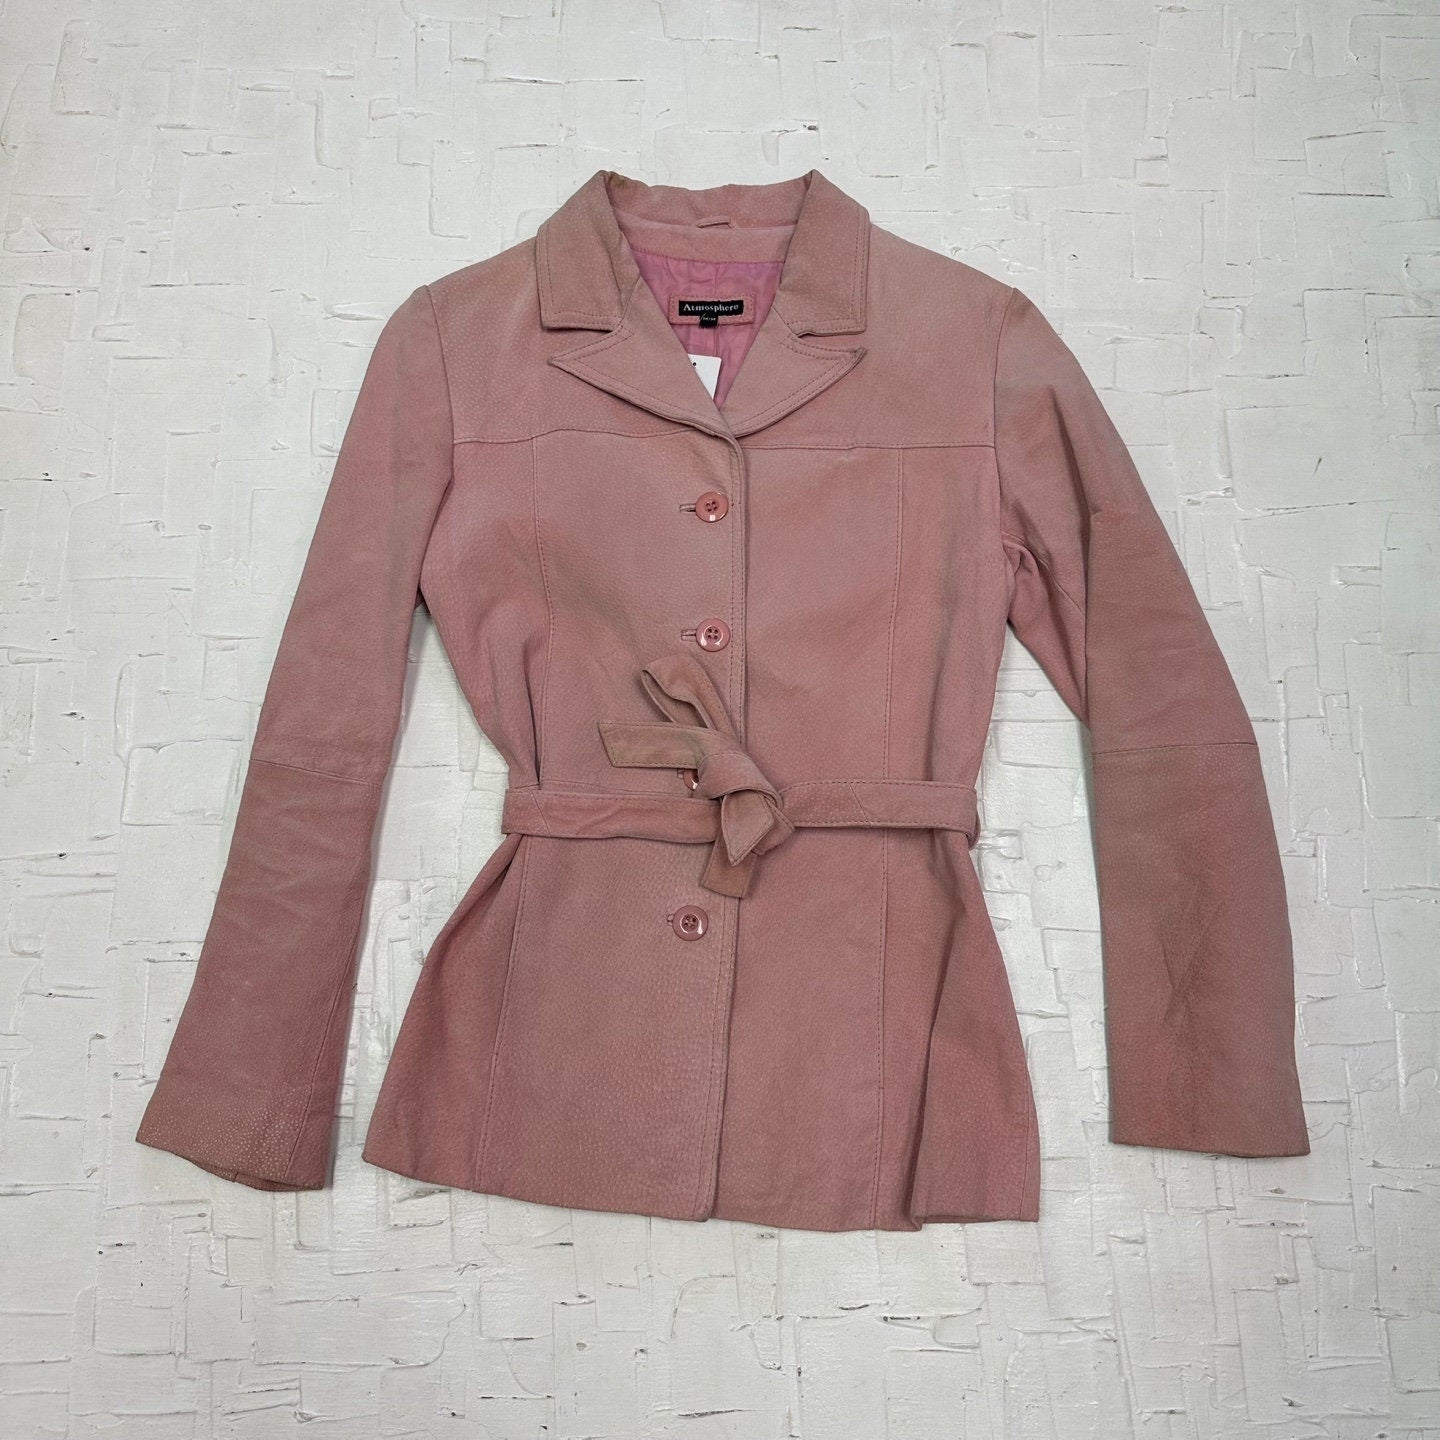 Vintage Pink Leather Suede Blazer with Belt Detail, Button Up Closure and Lapel Collar | Vintage Leather Blazer | Size M | SKU ST-2048 |